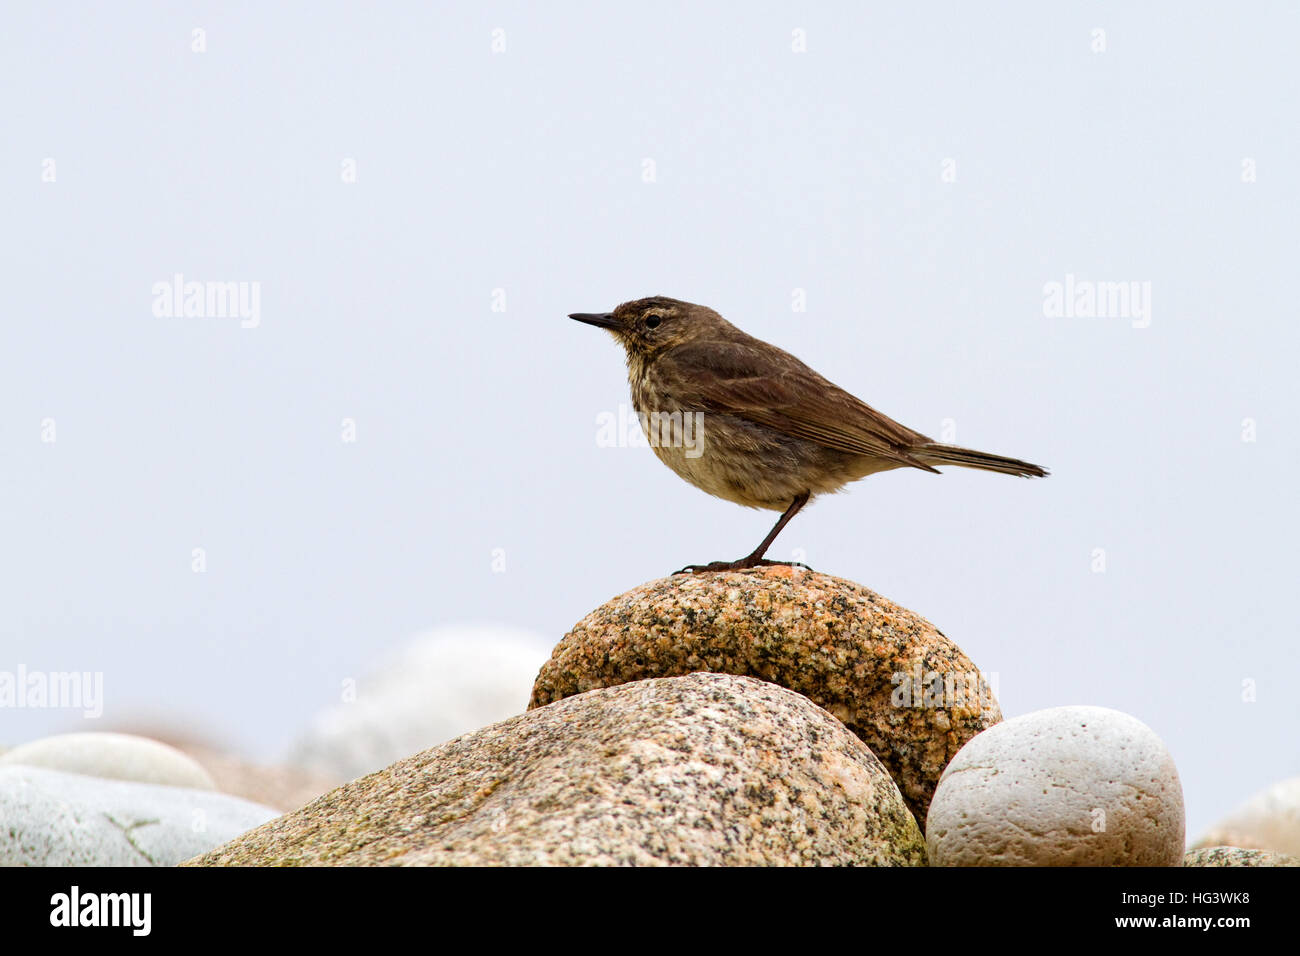 Rock Pipit perched on a rock along the coastline Stock Photo